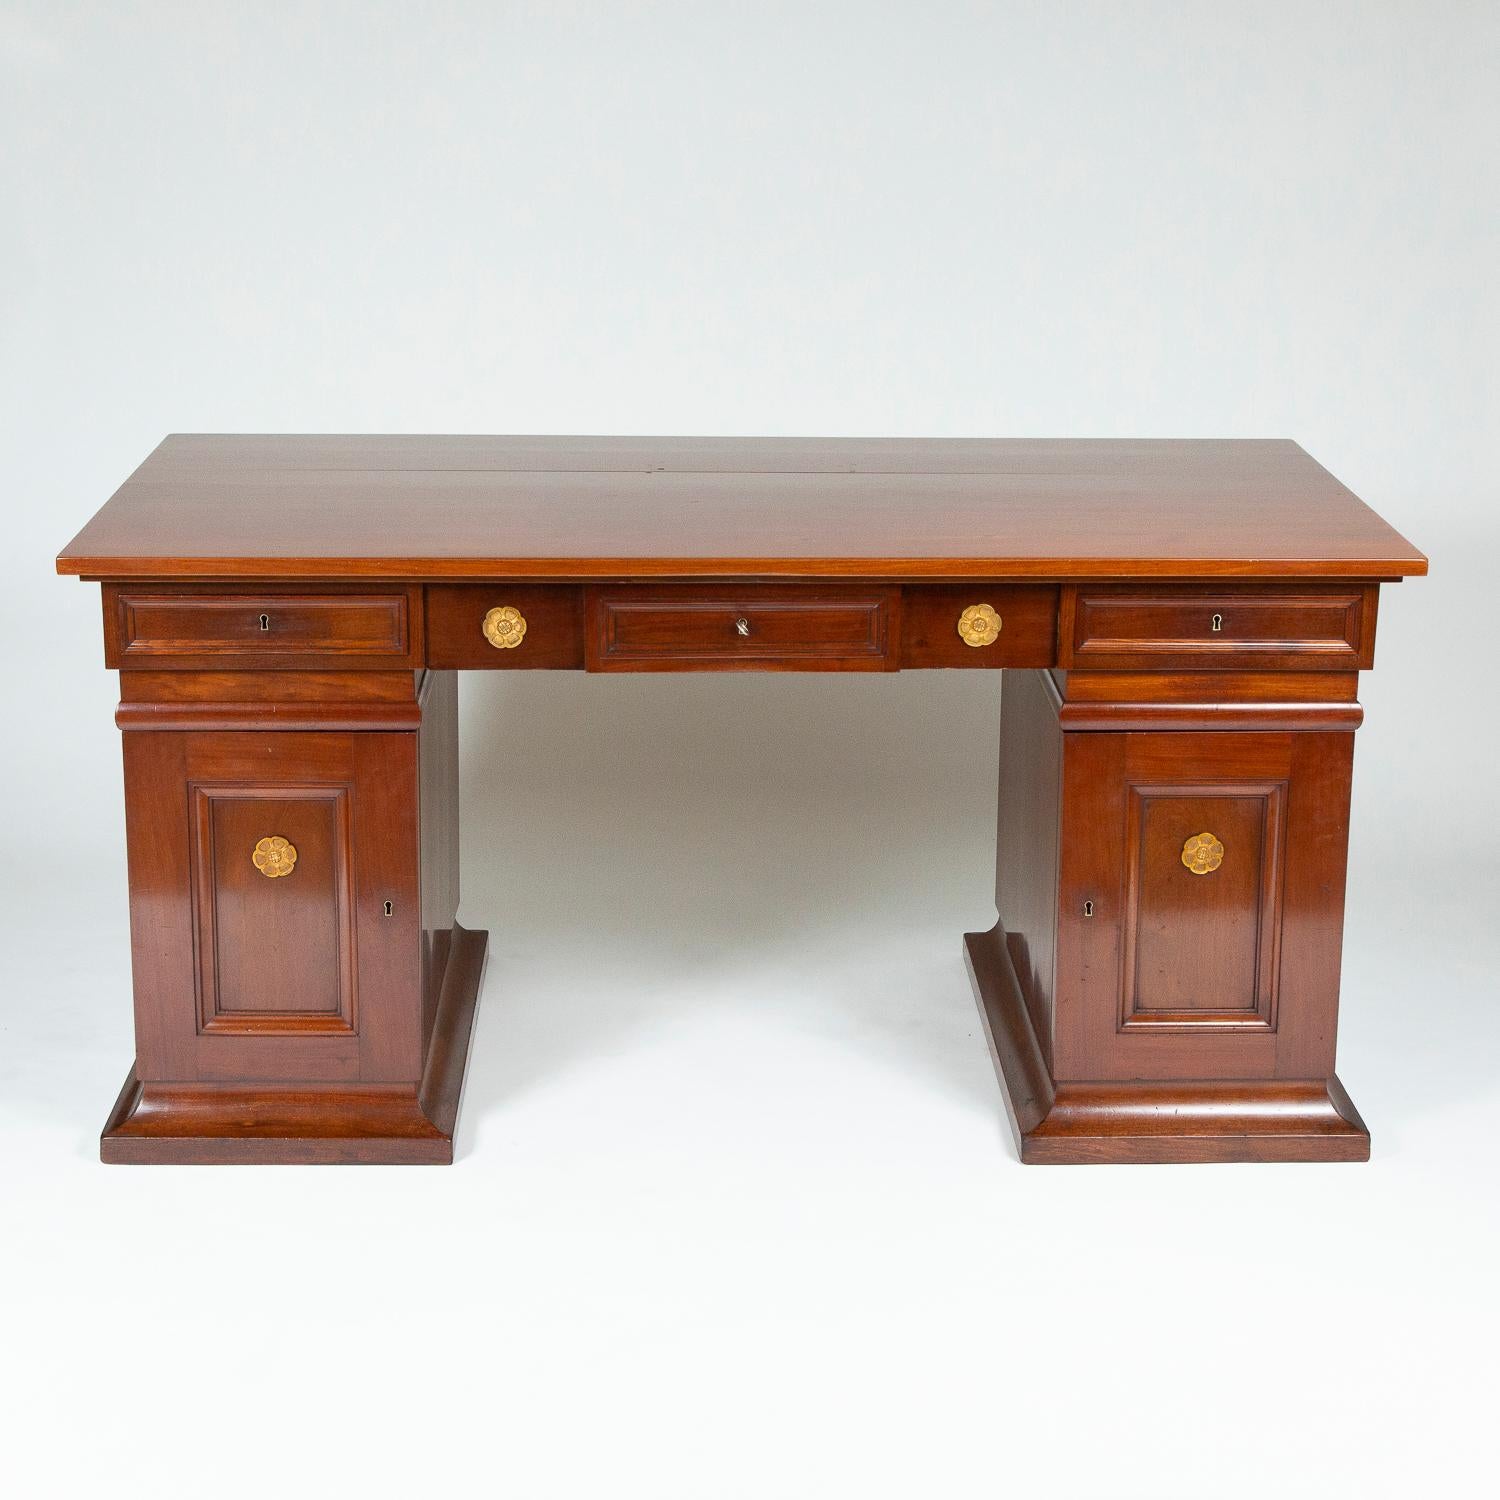 A mahogany pedestal desk with gilt bronze mounts, designed by Thorvald Bindesbøll, made by Severin and Andreas Jensen of Copenhagen. 

Thorvald Bindesbøll (21 July 1846-27 August 1908) was a Danish National romantic architect, sculptor and